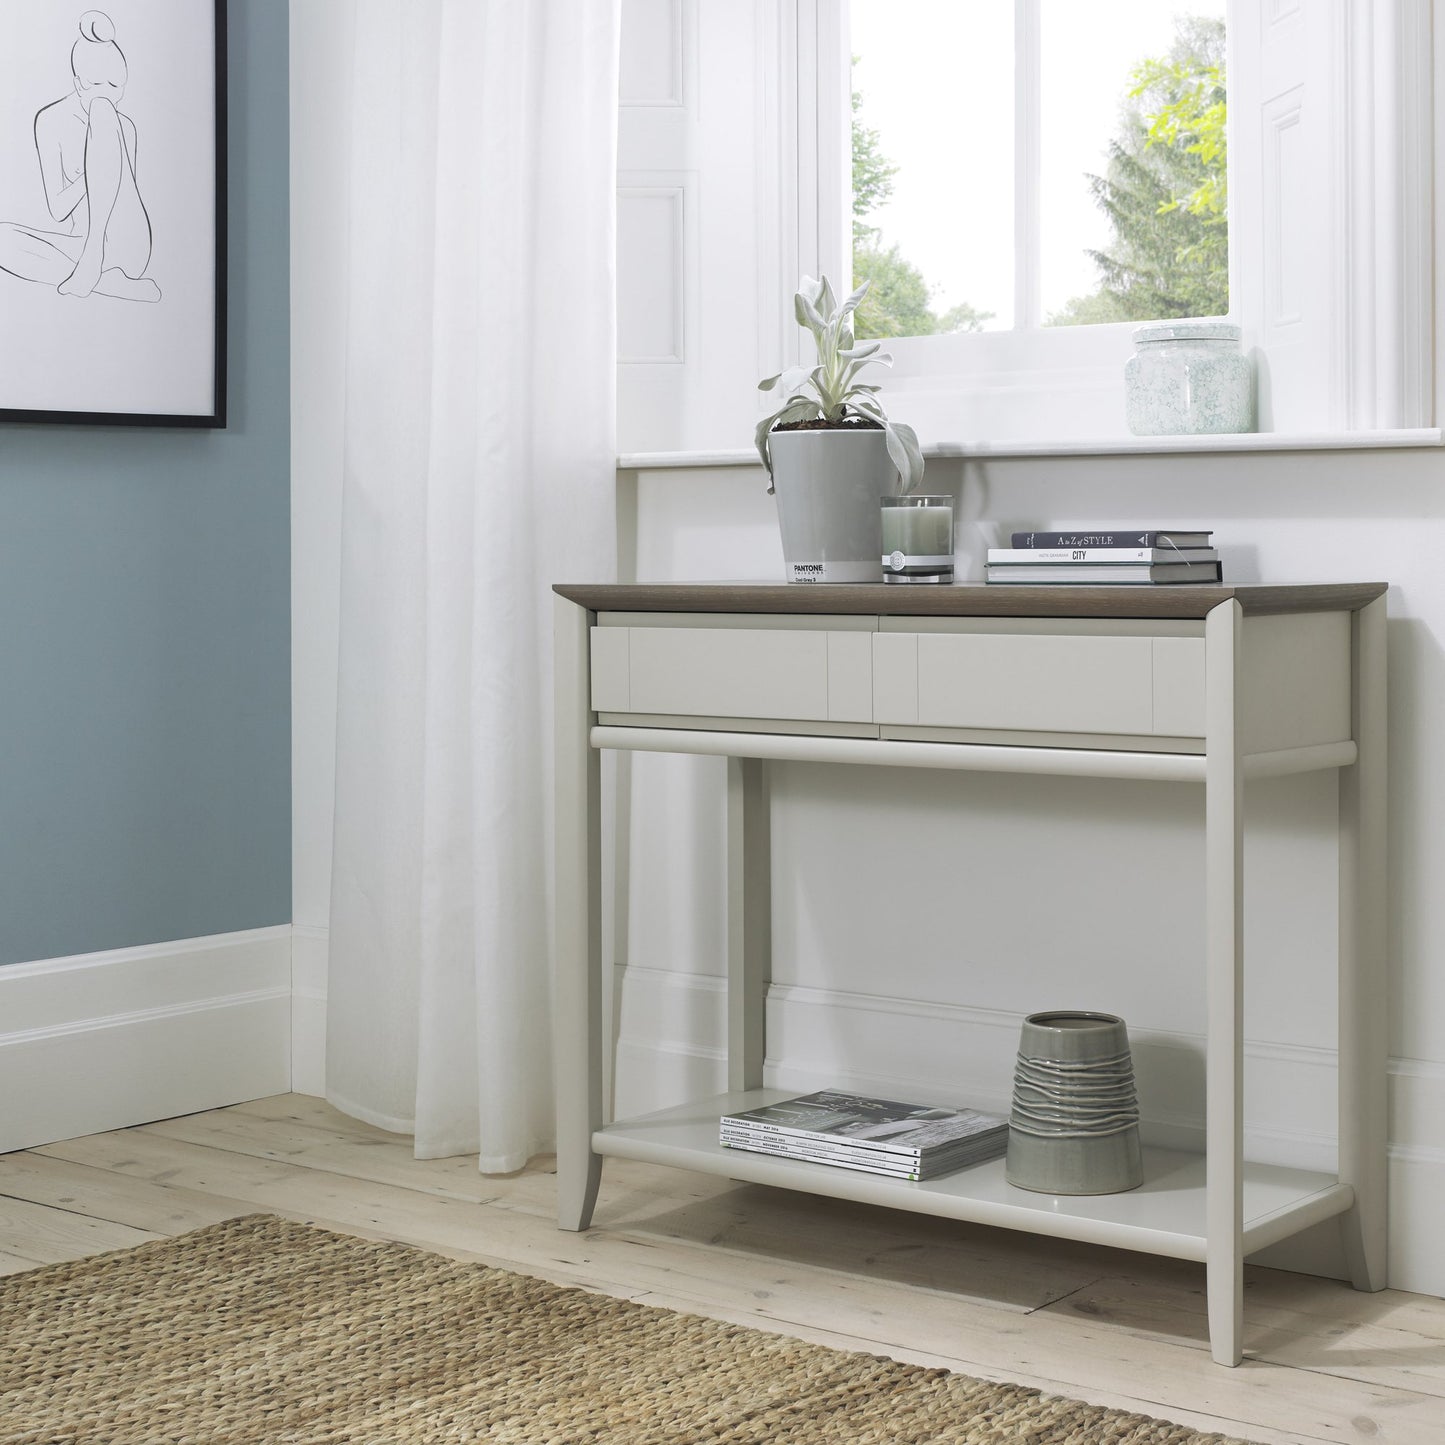 ODENSE CONSOLE TABLE WITH DRAWERS